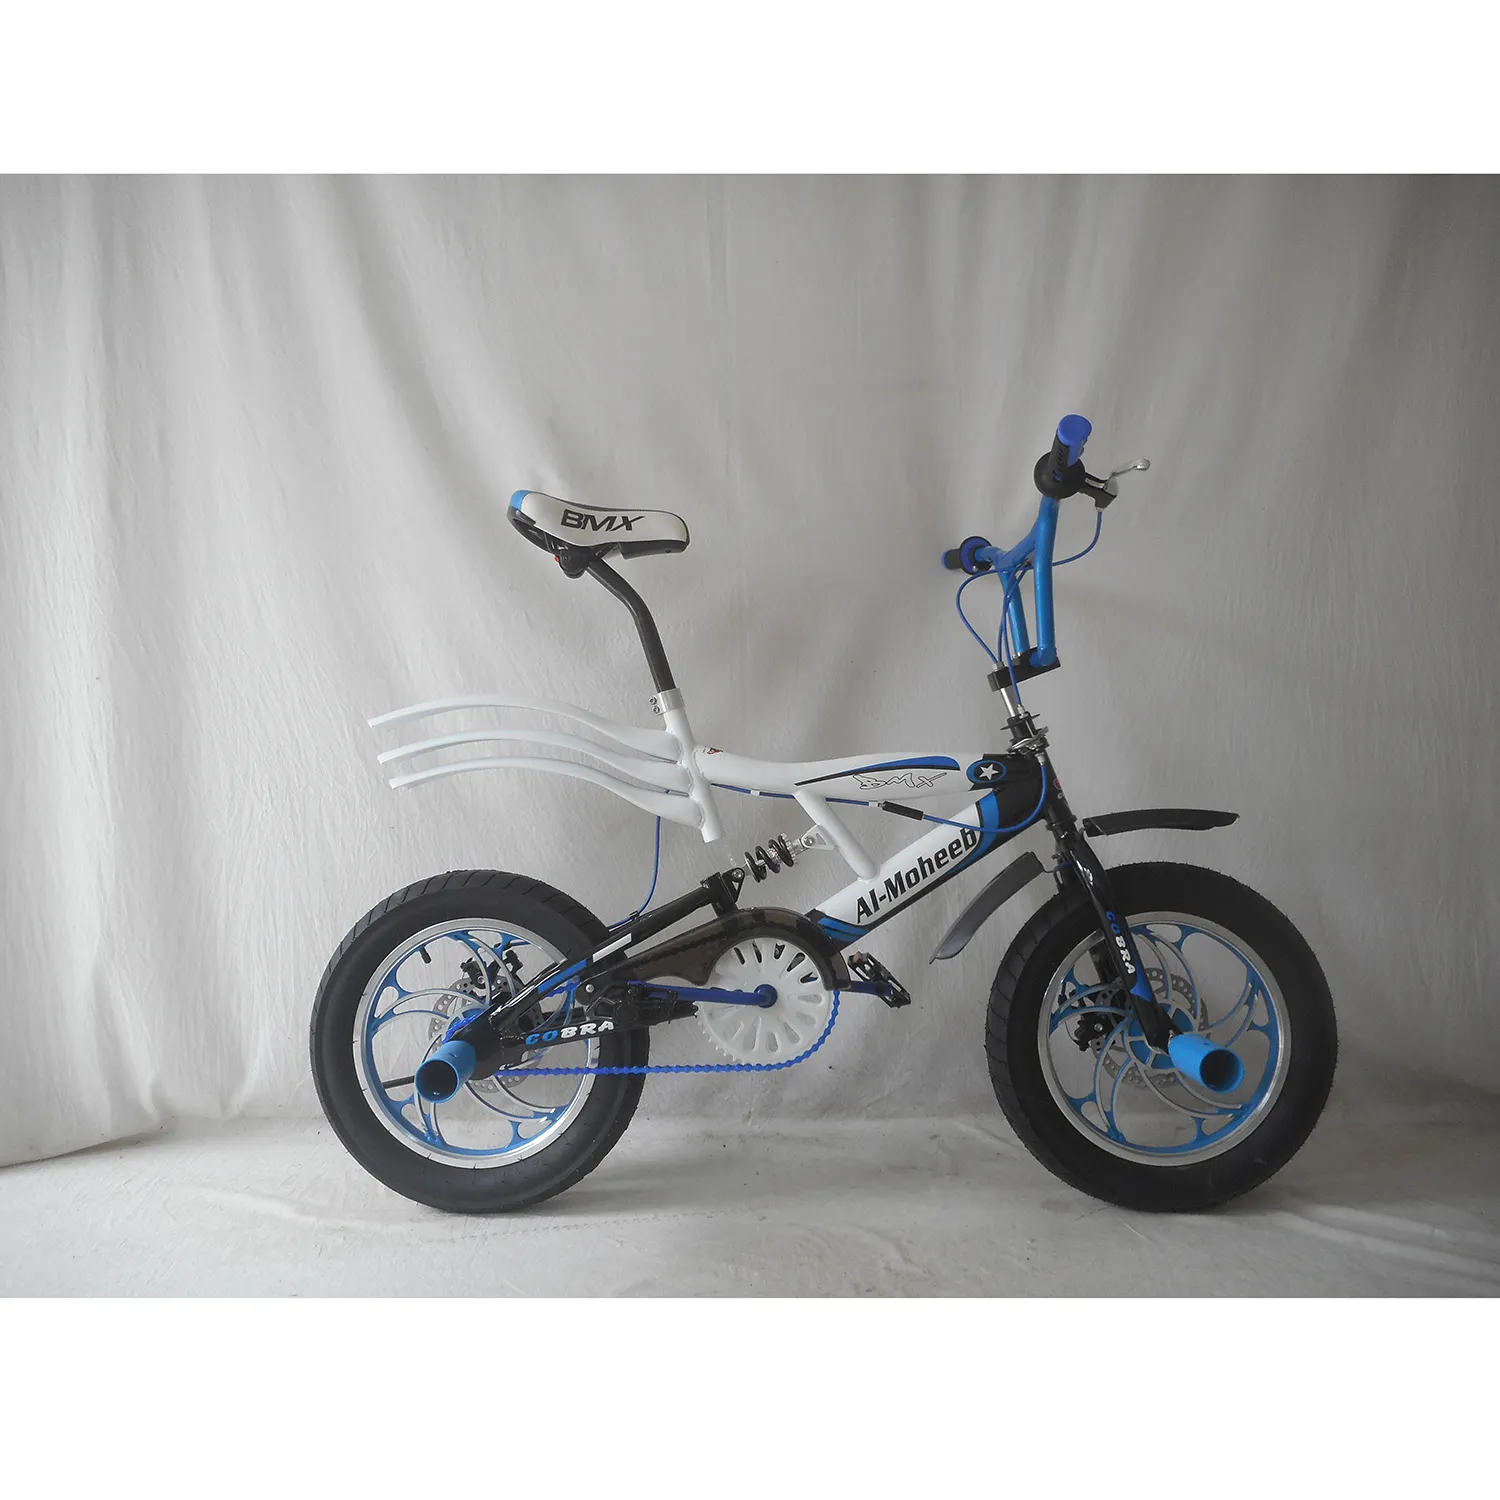 Factory All Kinds Of Price Bmx Bike For Sale / Freestyle 20 Inch 24 Inch 26 Inch Mini Bmx Bicycle /wholesale Cheap Original Bmx